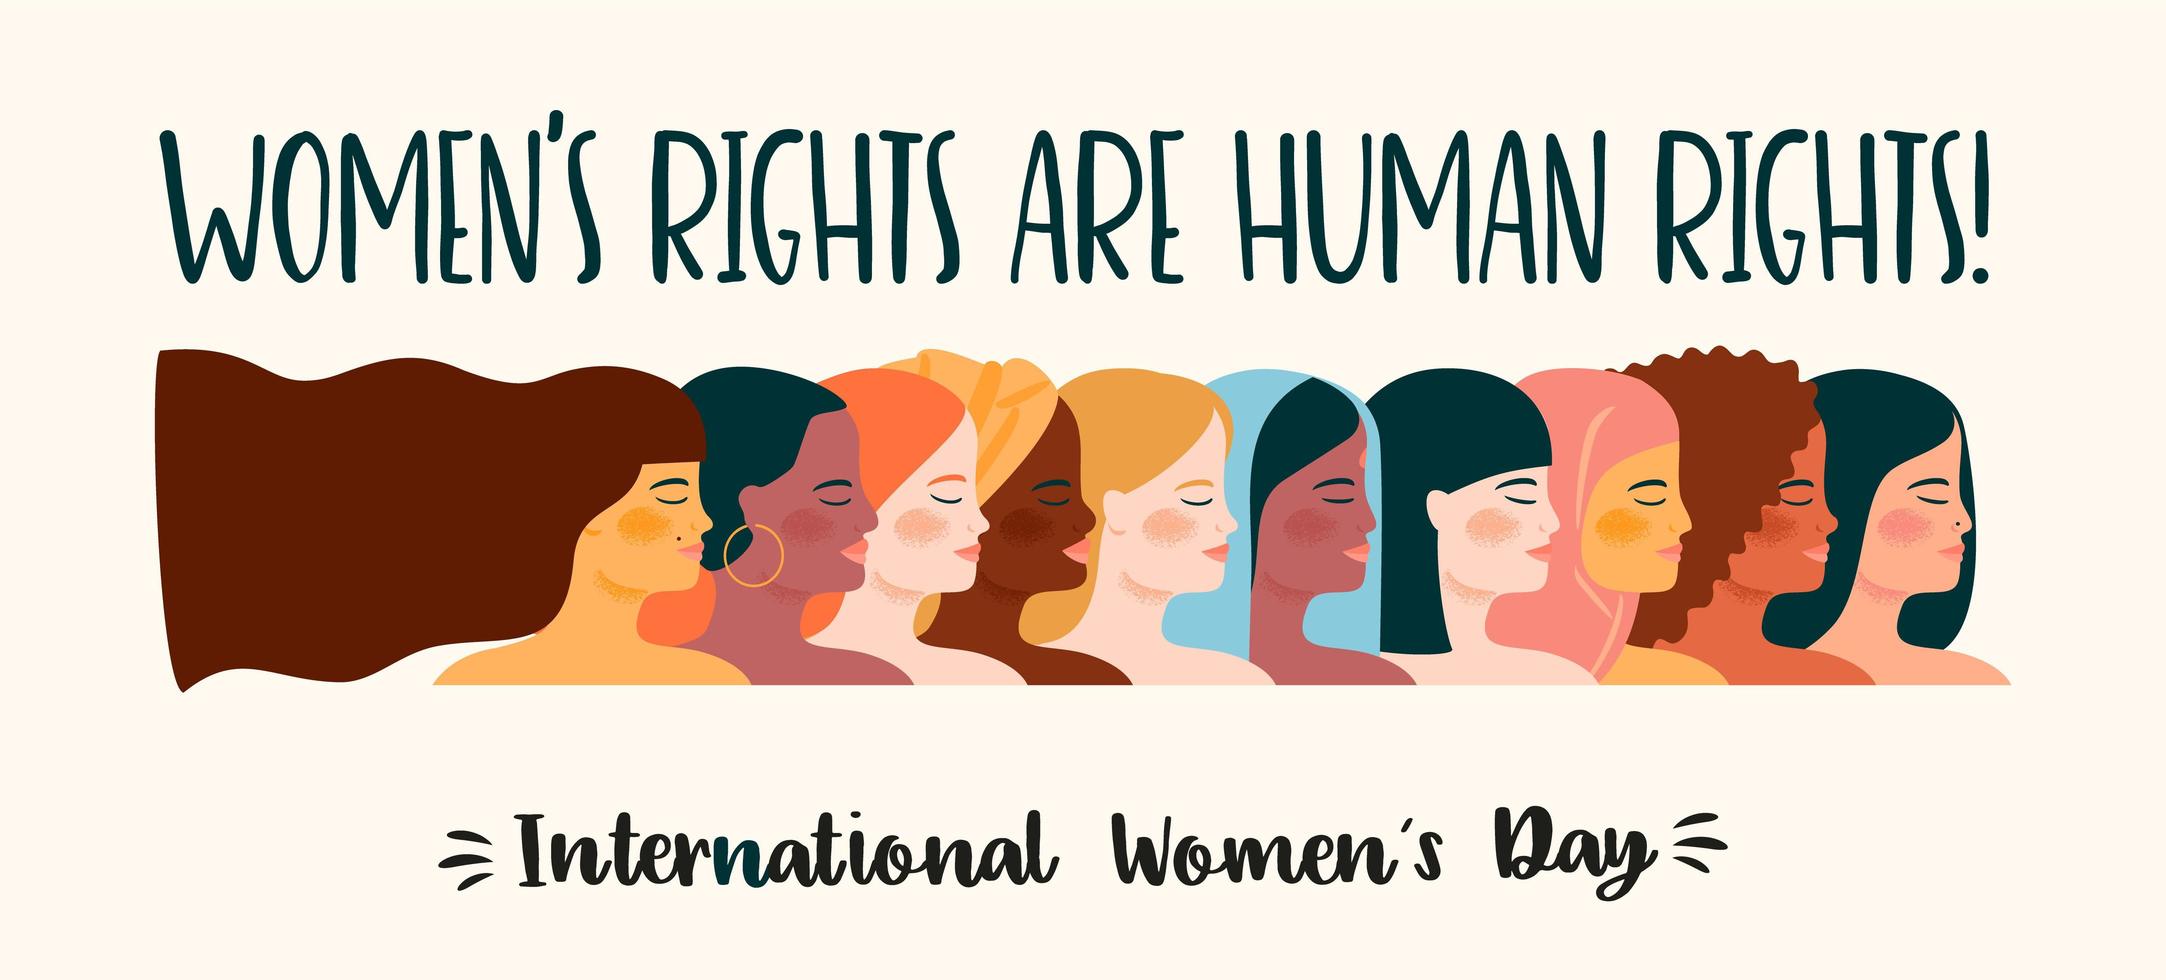 International Women's Day Poster with Diverse Women  vector